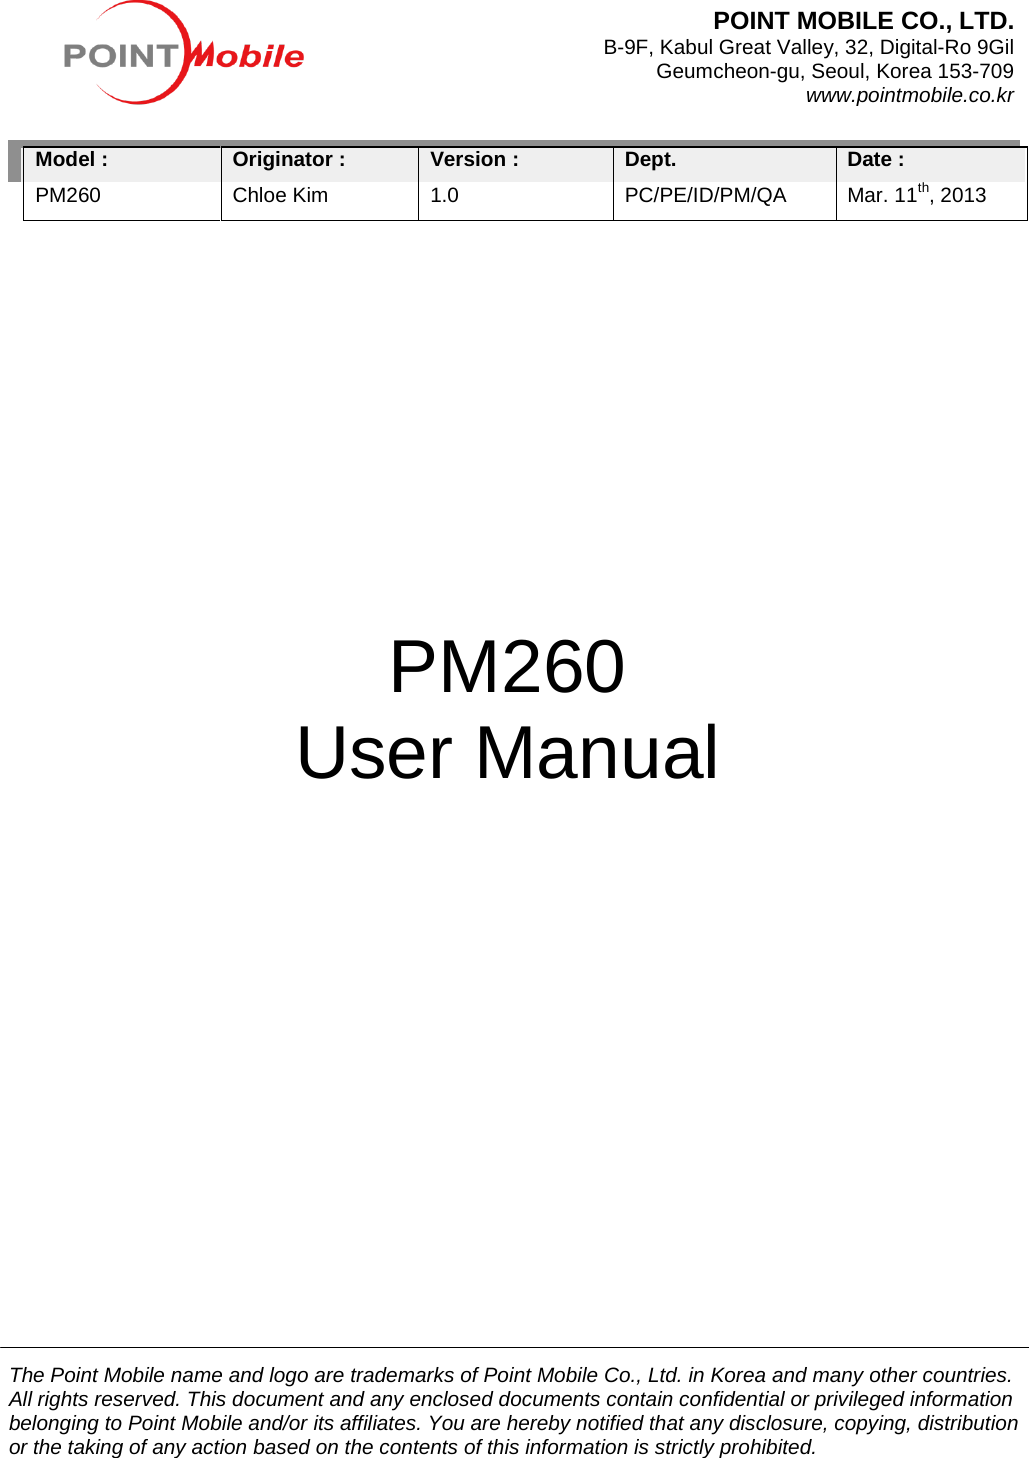          Model : PM260               Originator : Chloe Kim Version :   1.0 Dept. PC/PE/ID/PM/QA Date :   Mar. 11th, 2013                                                                                                                                                                                                  PM260 User Manual POINT MOBILE CO., LTD.   B-9F, Kabul Great Valley, 32, Digital-Ro 9Gil Geumcheon-gu, Seoul, Korea 153-709 www.pointmobile.co.kr The Point Mobile name and logo are trademarks of Point Mobile Co., Ltd. in Korea and many other countries. All rights reserved. This document and any enclosed documents contain confidential or privileged information belonging to Point Mobile and/or its affiliates. You are hereby notified that any disclosure, copying, distribution or the taking of any action based on the contents of this information is strictly prohibited.  